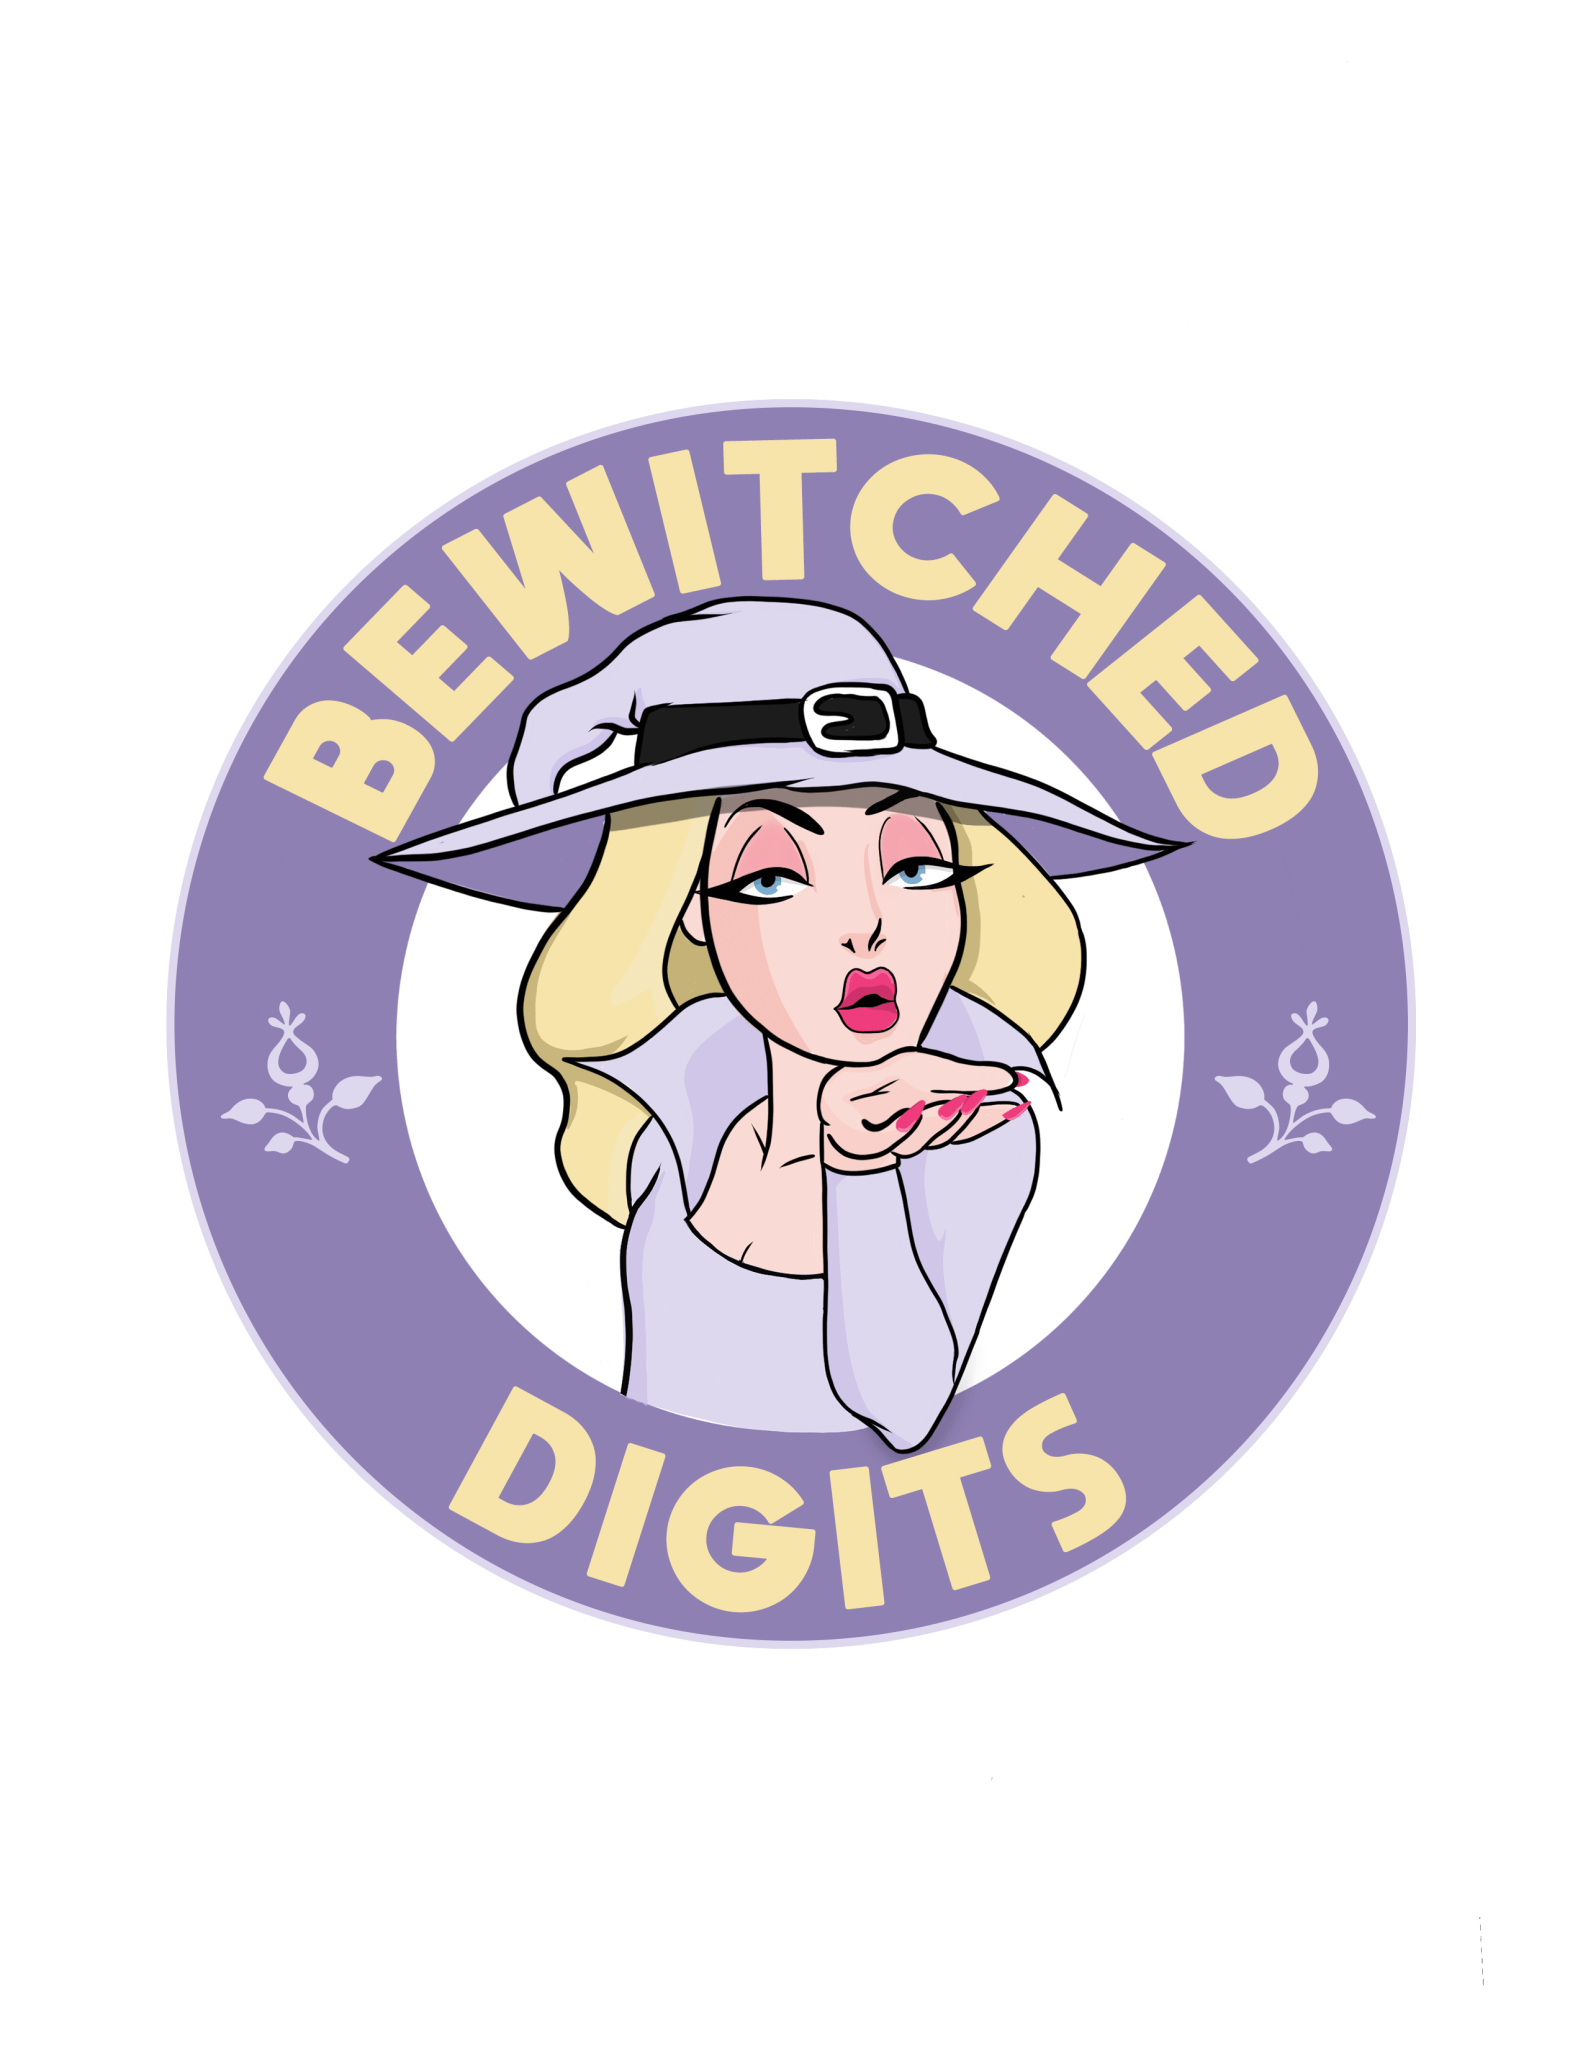 Bewitched Digits coupons